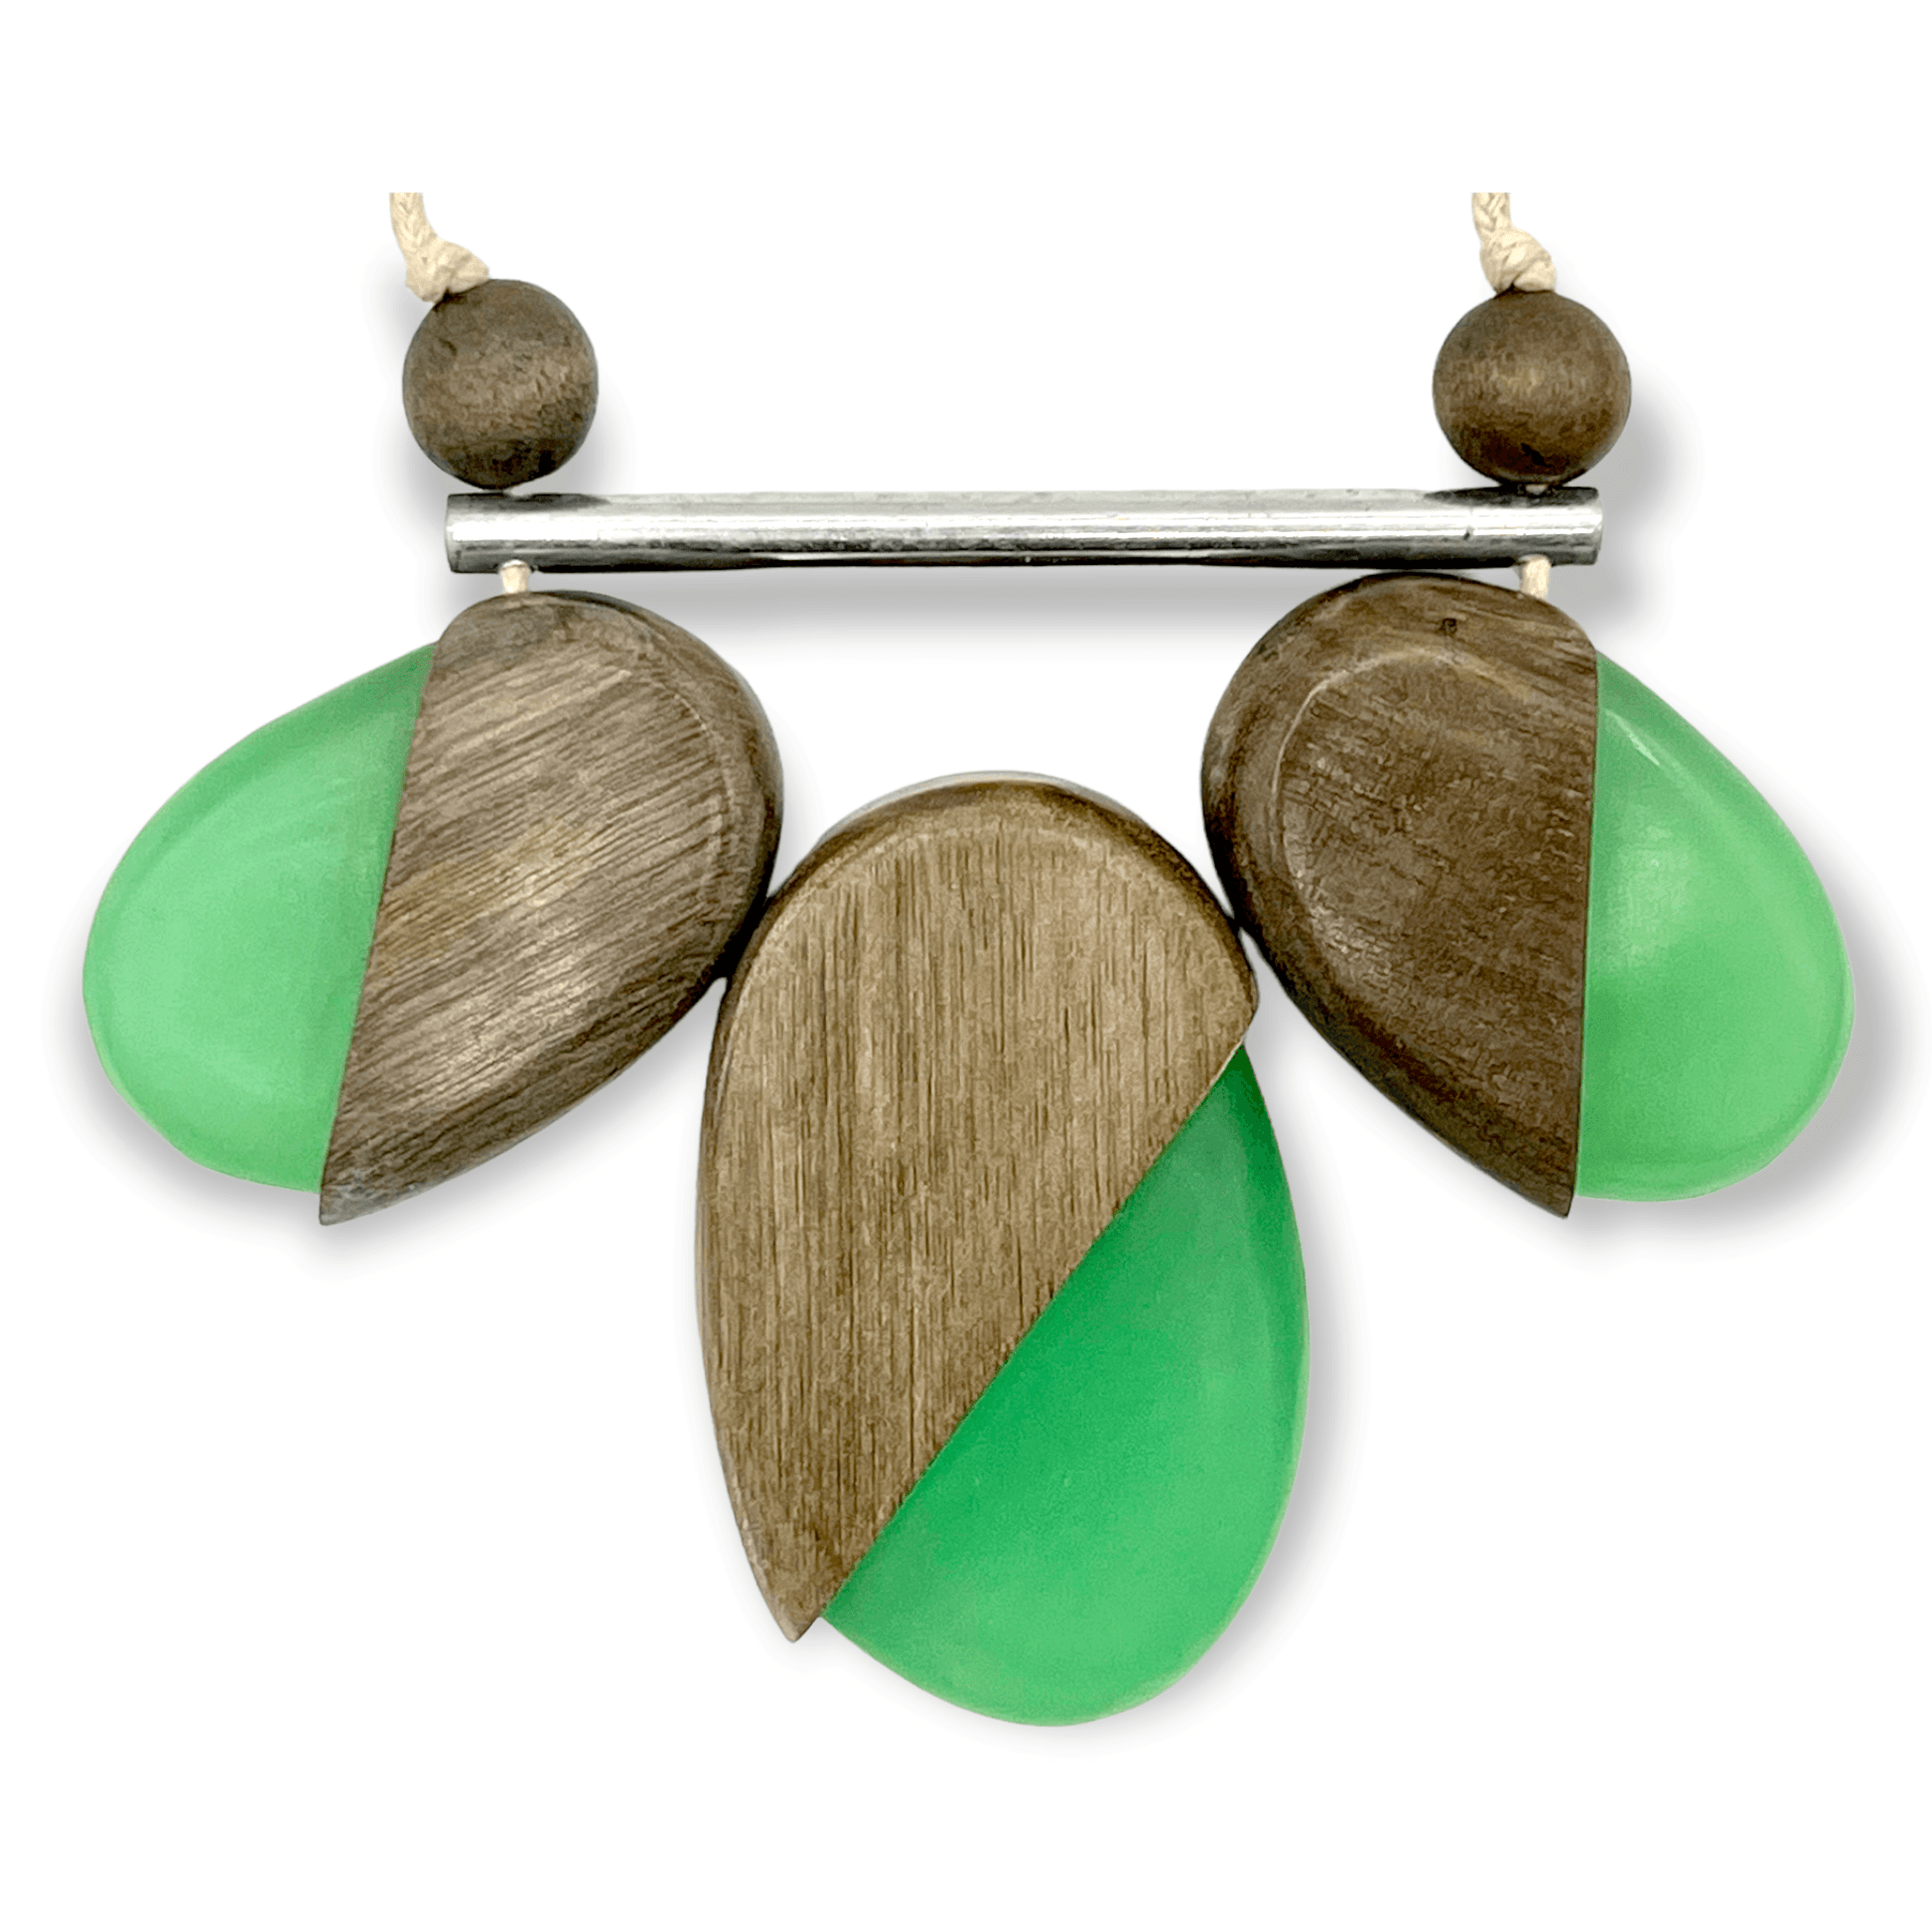 Modern take on a wood and resin statement necklace - Sundara Joon